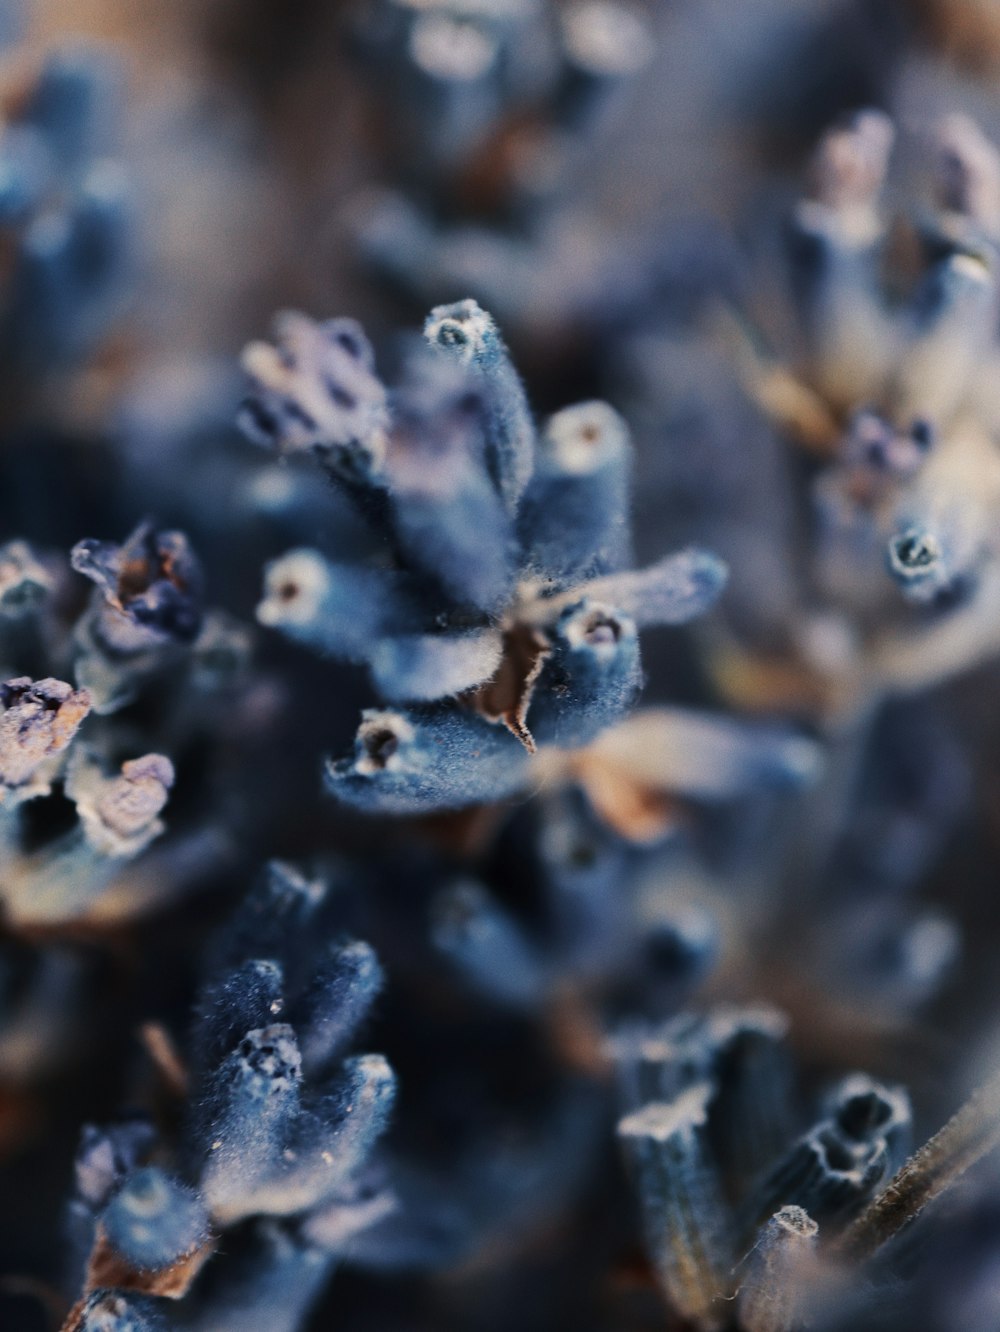 a close up of a bunch of blue flowers